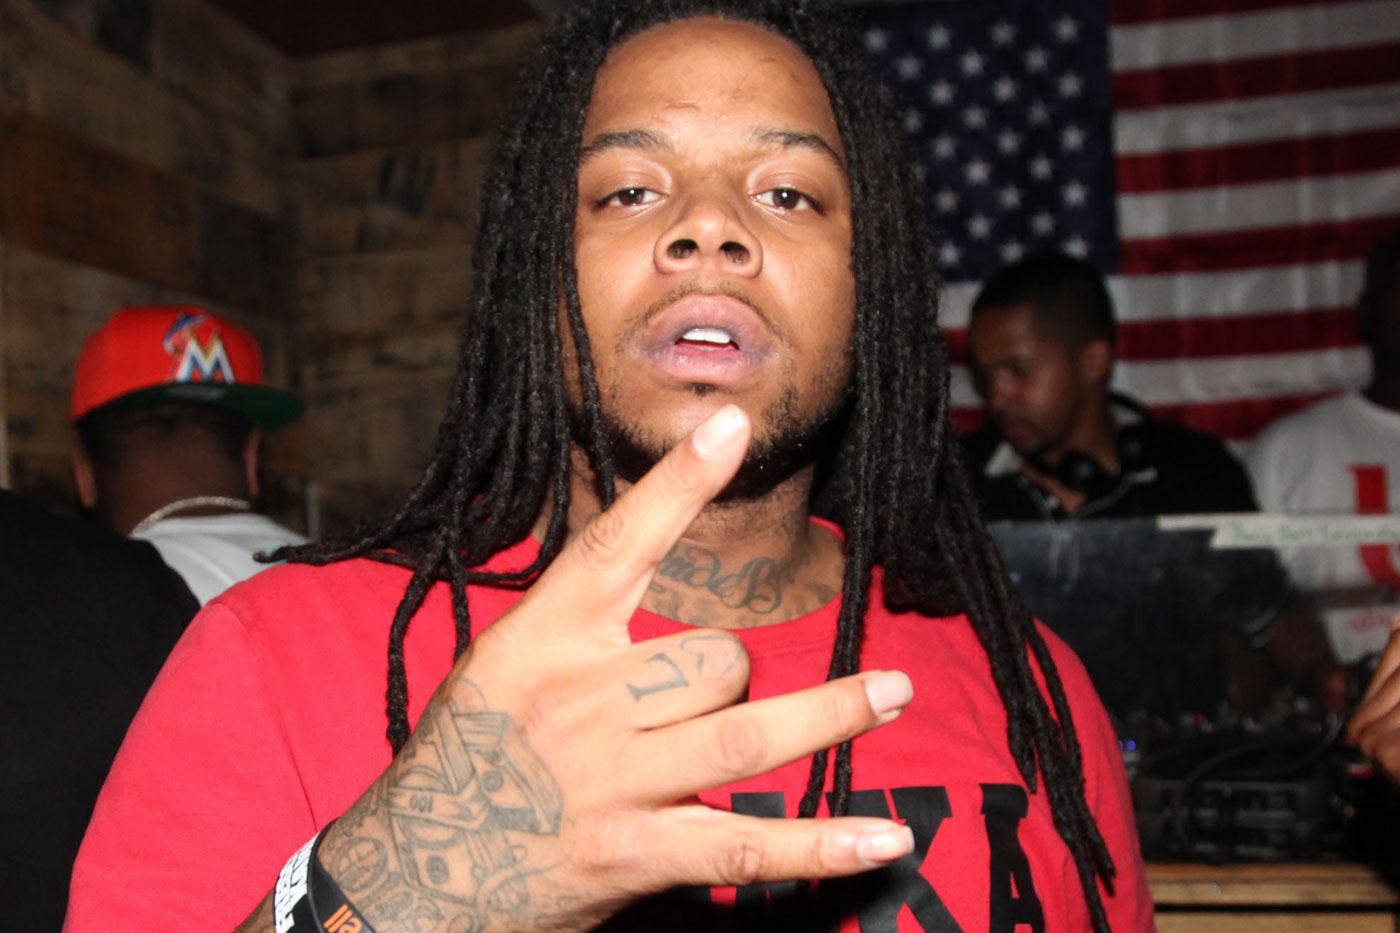 King Louie Discusses Gun Violence With CNN Just Days After Being Shot